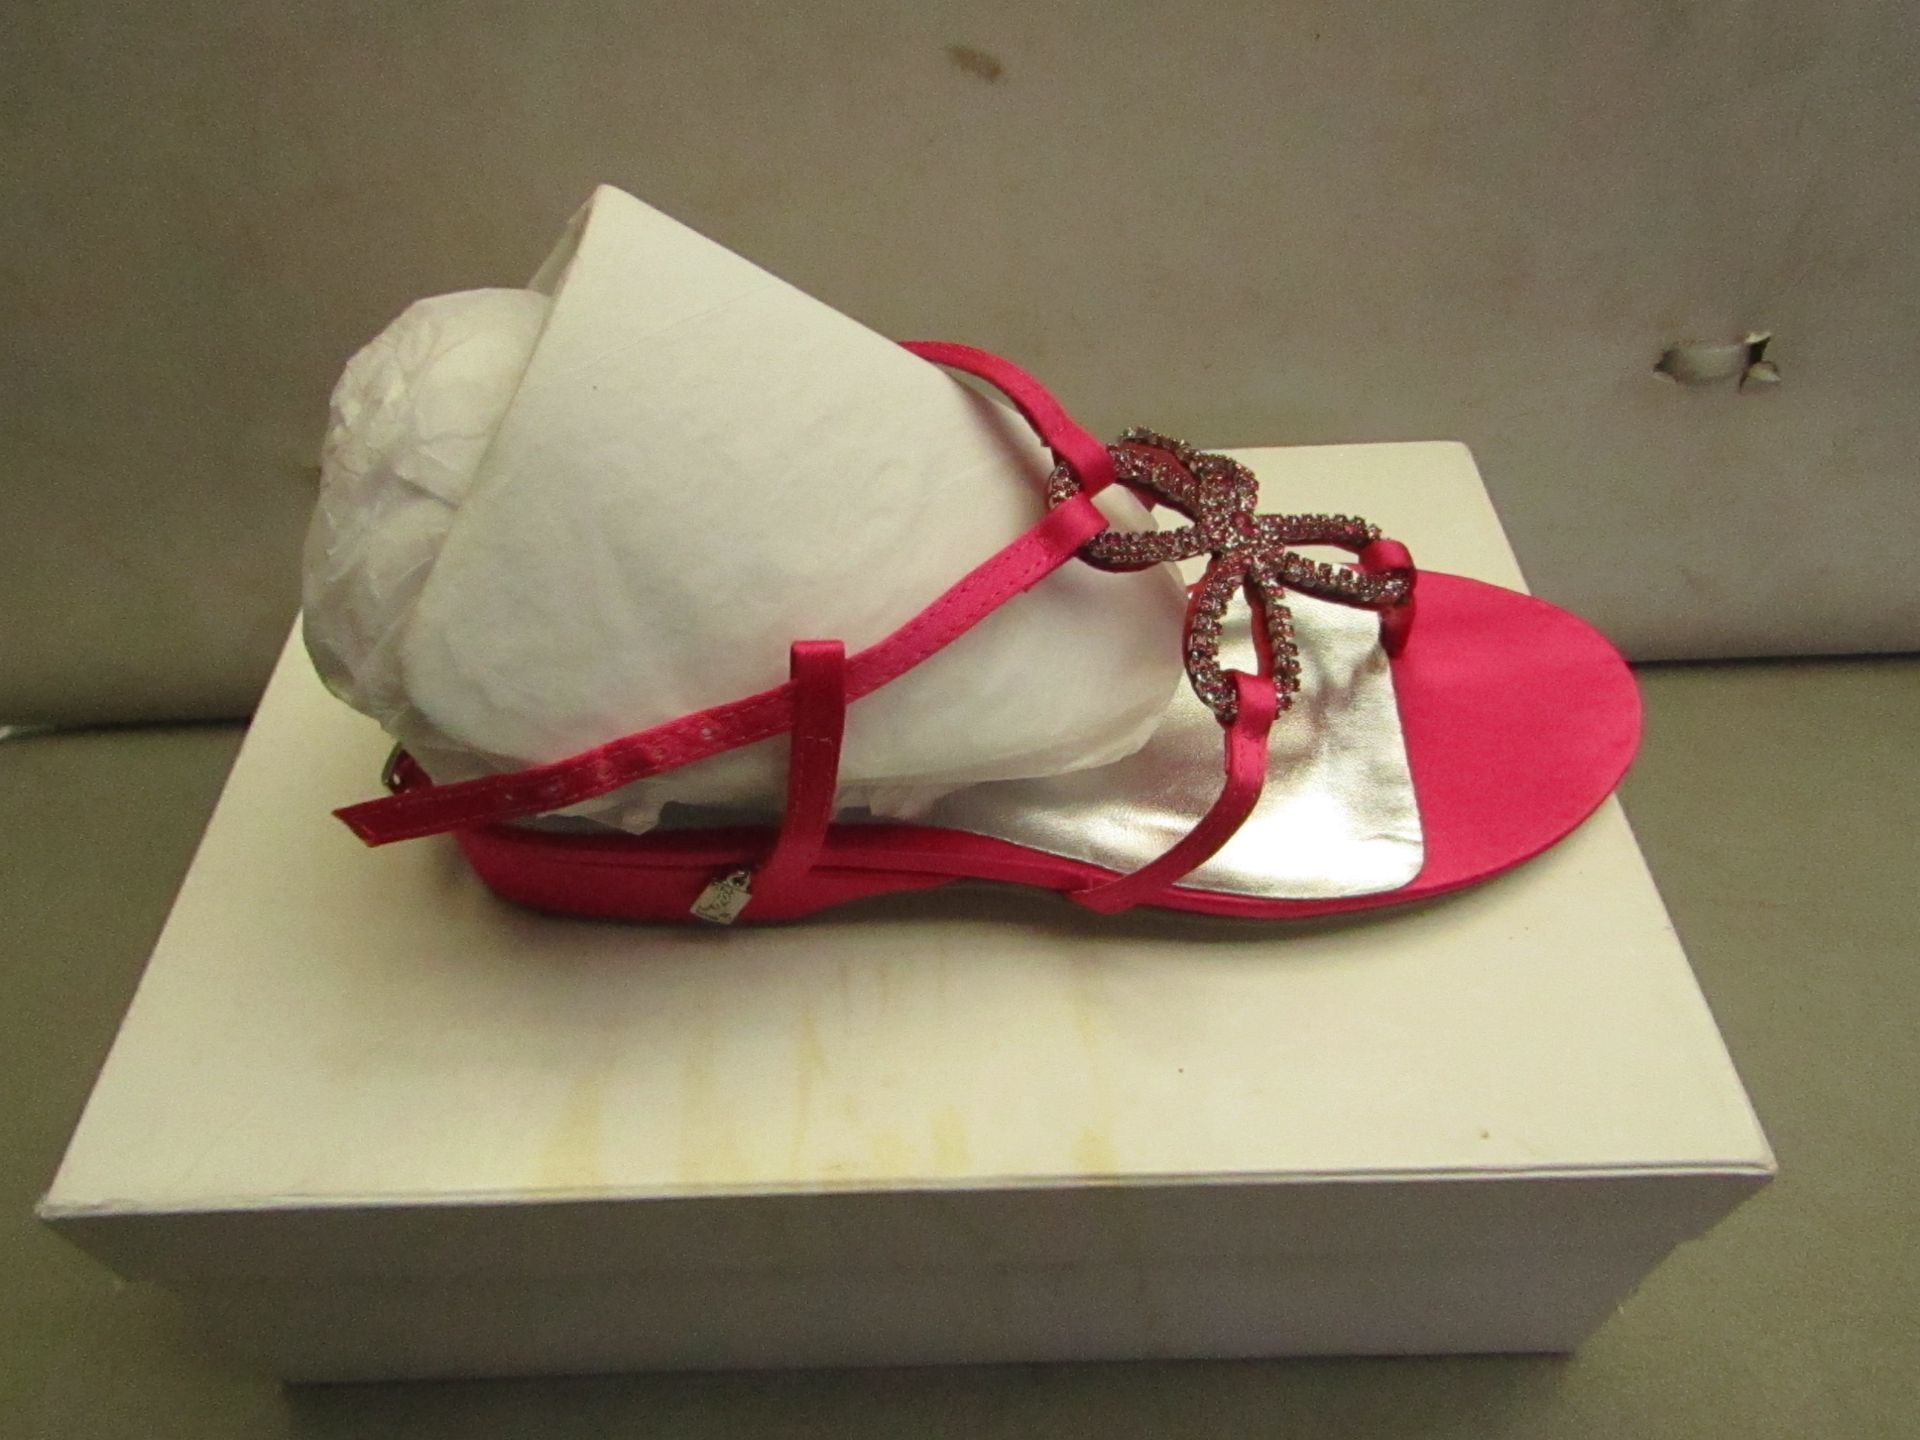 Unze by Shalamar Size 3 Ladies Shoes. New & boxed see image for design